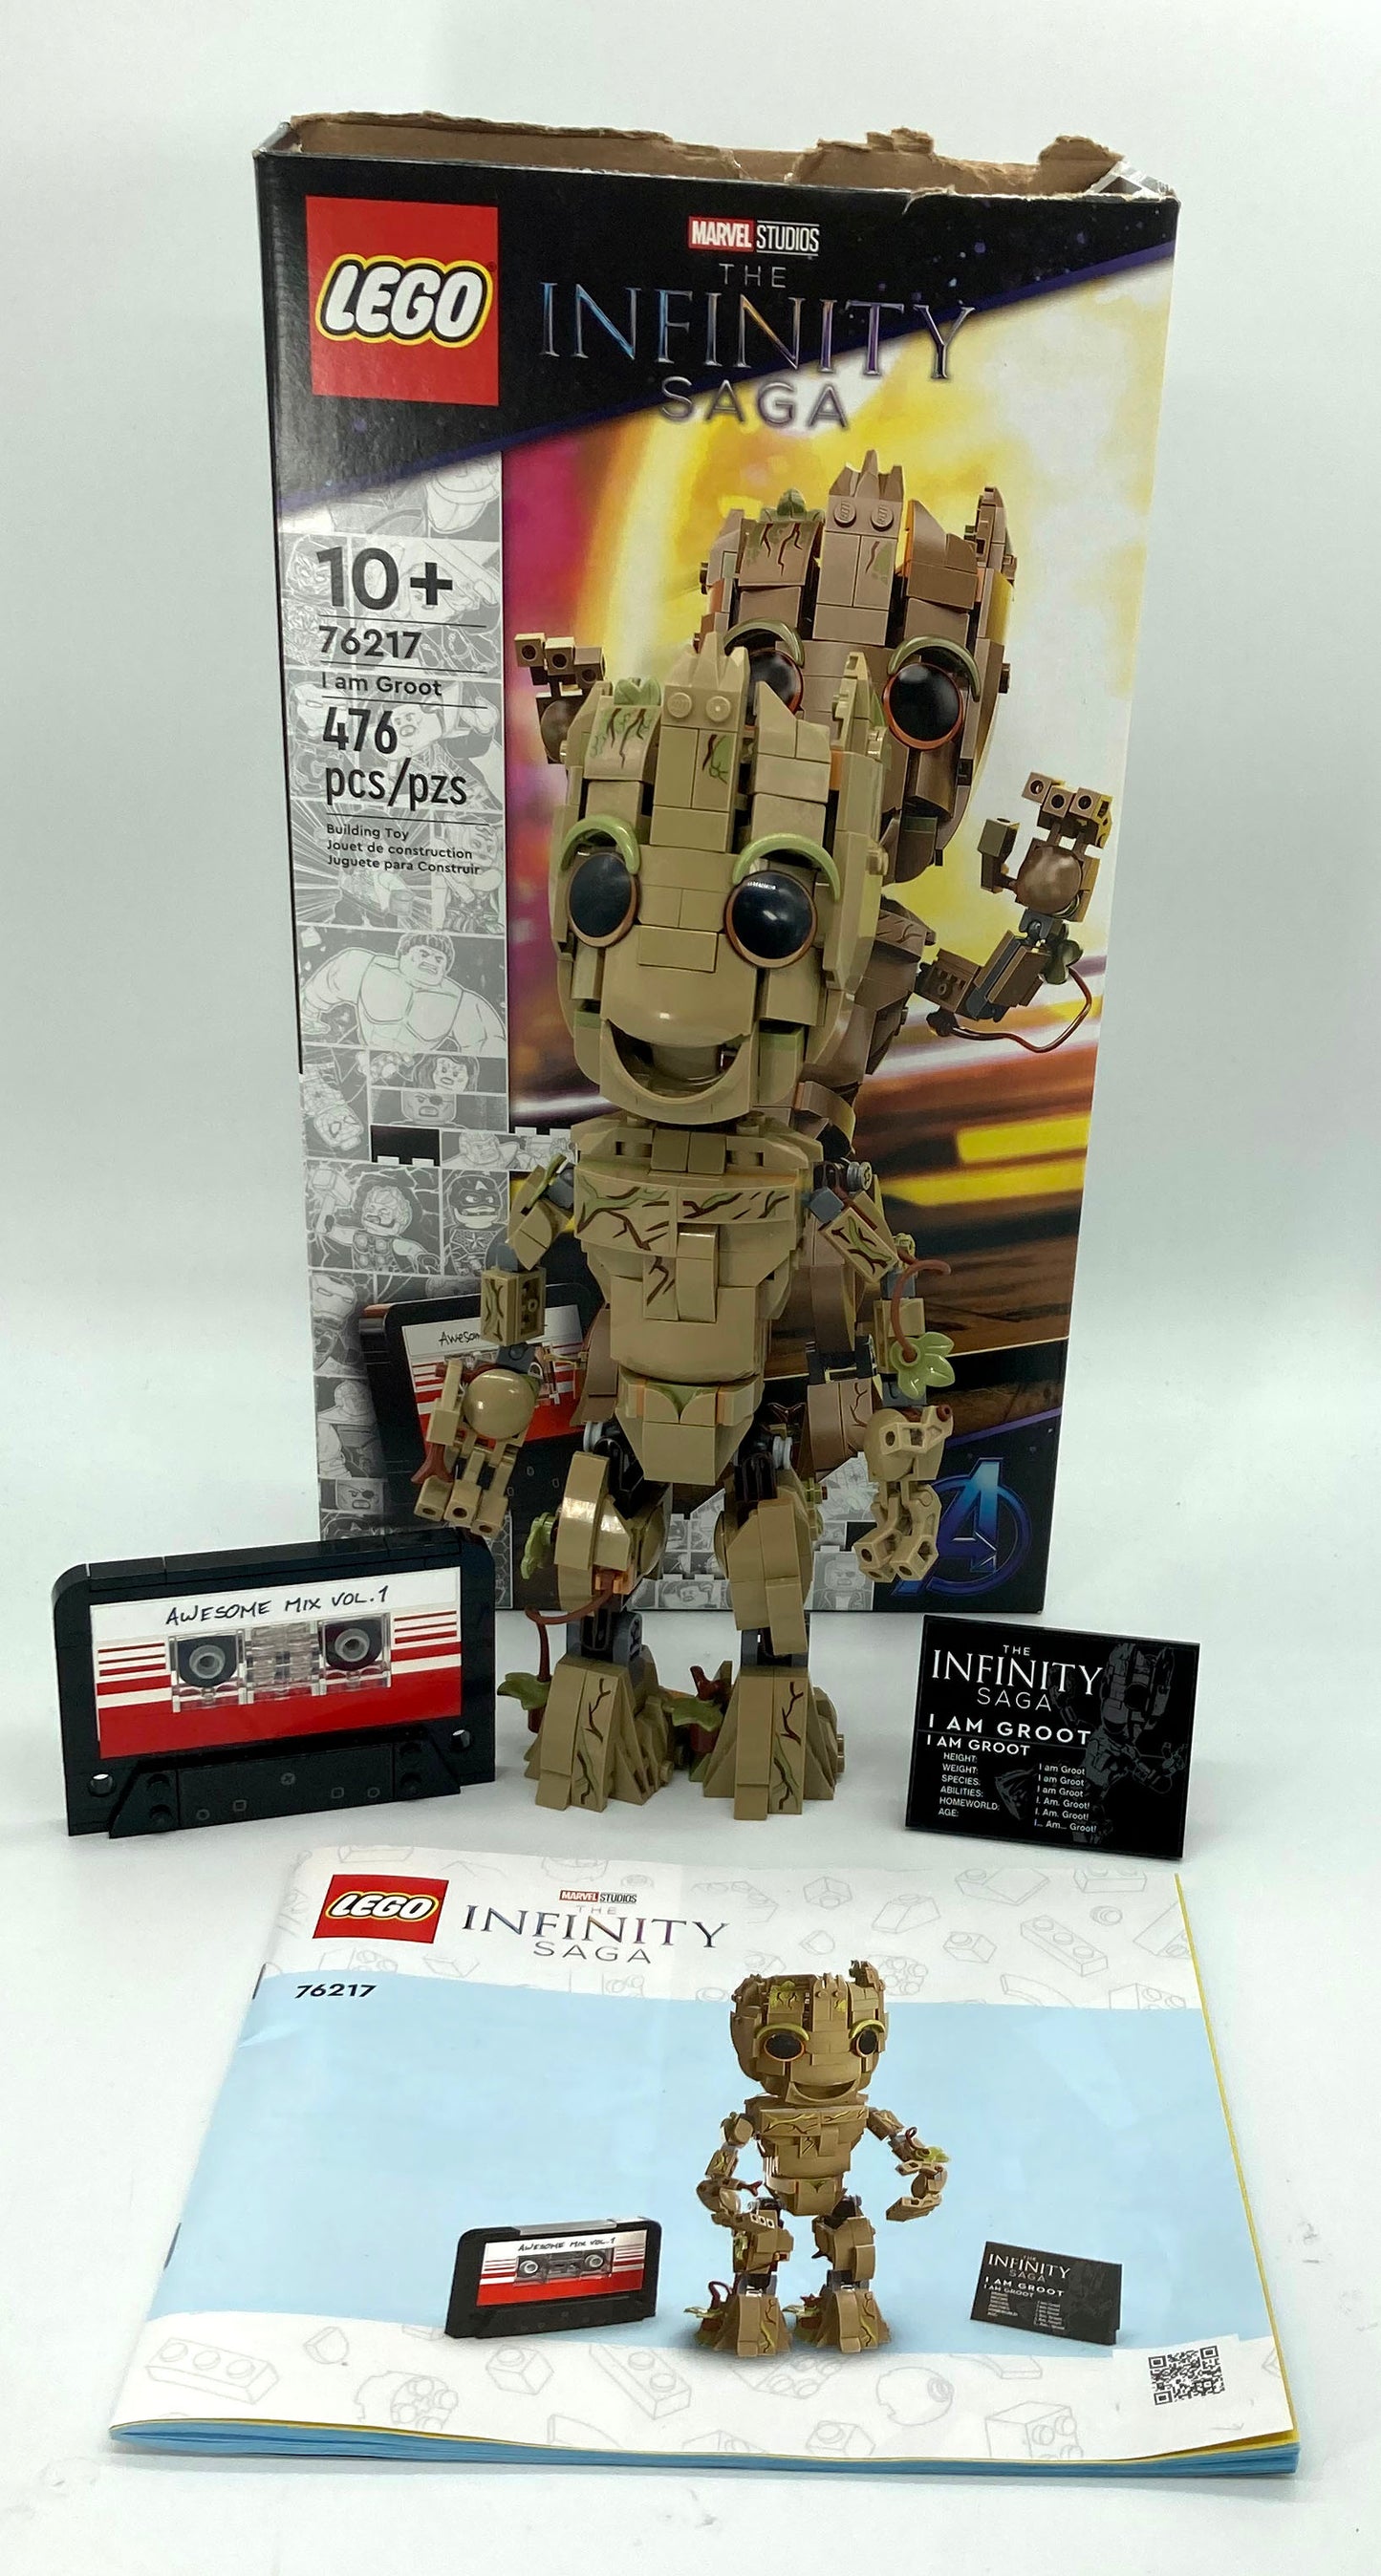 Used Set 76217 I am Groot (with Instruction Manual and Box)